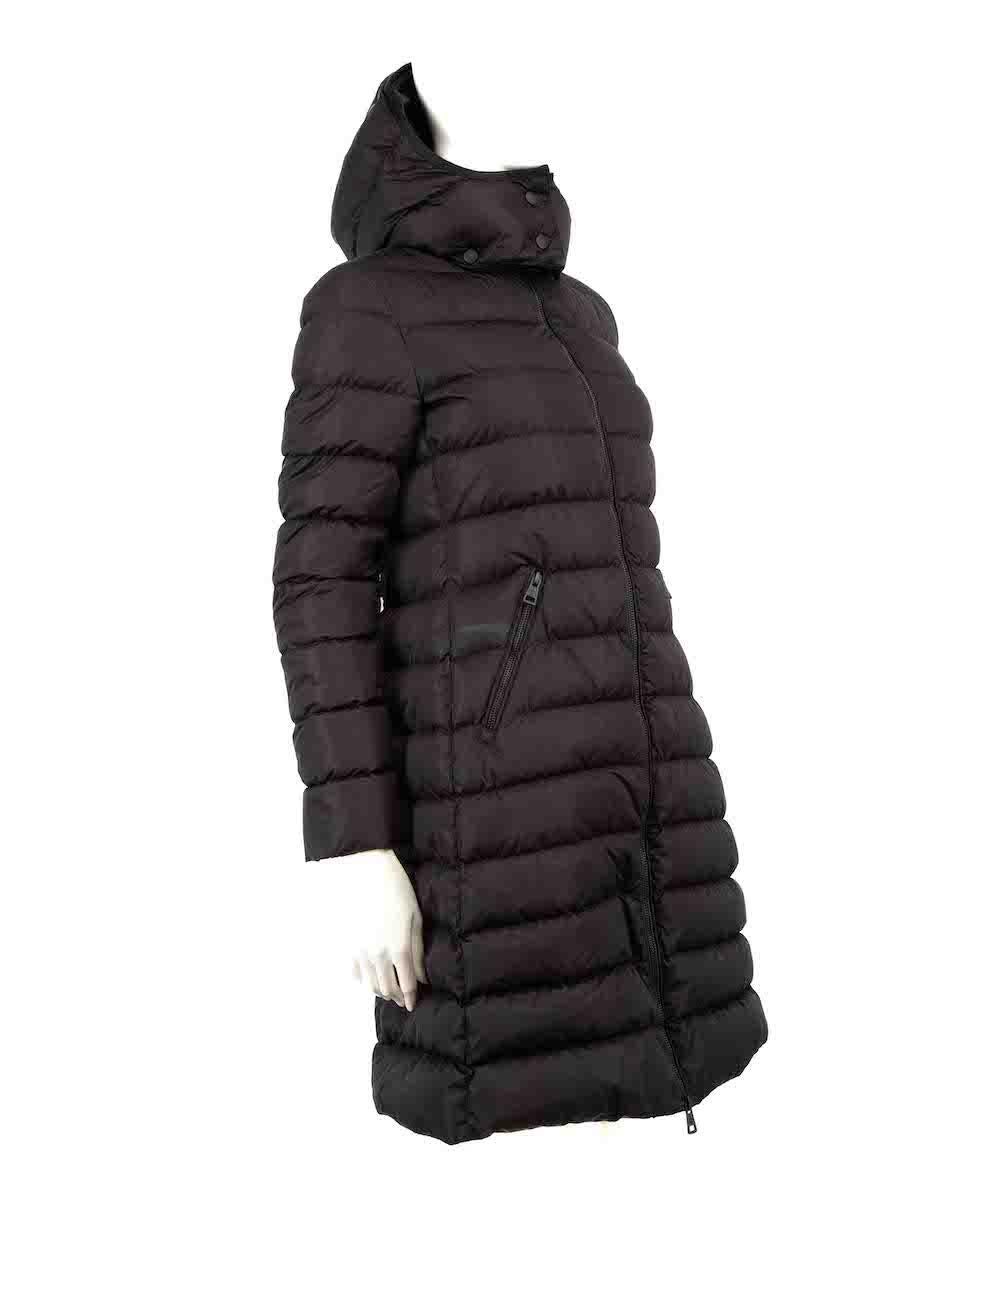 CONDITION is Good. Minor wear to coat is evident. Light marks around the right zip pocket, sides and inner collar of the coat. Small scratches on the inner lining , sides and on the left shoulder area. Overall pull to tread on the front, back and